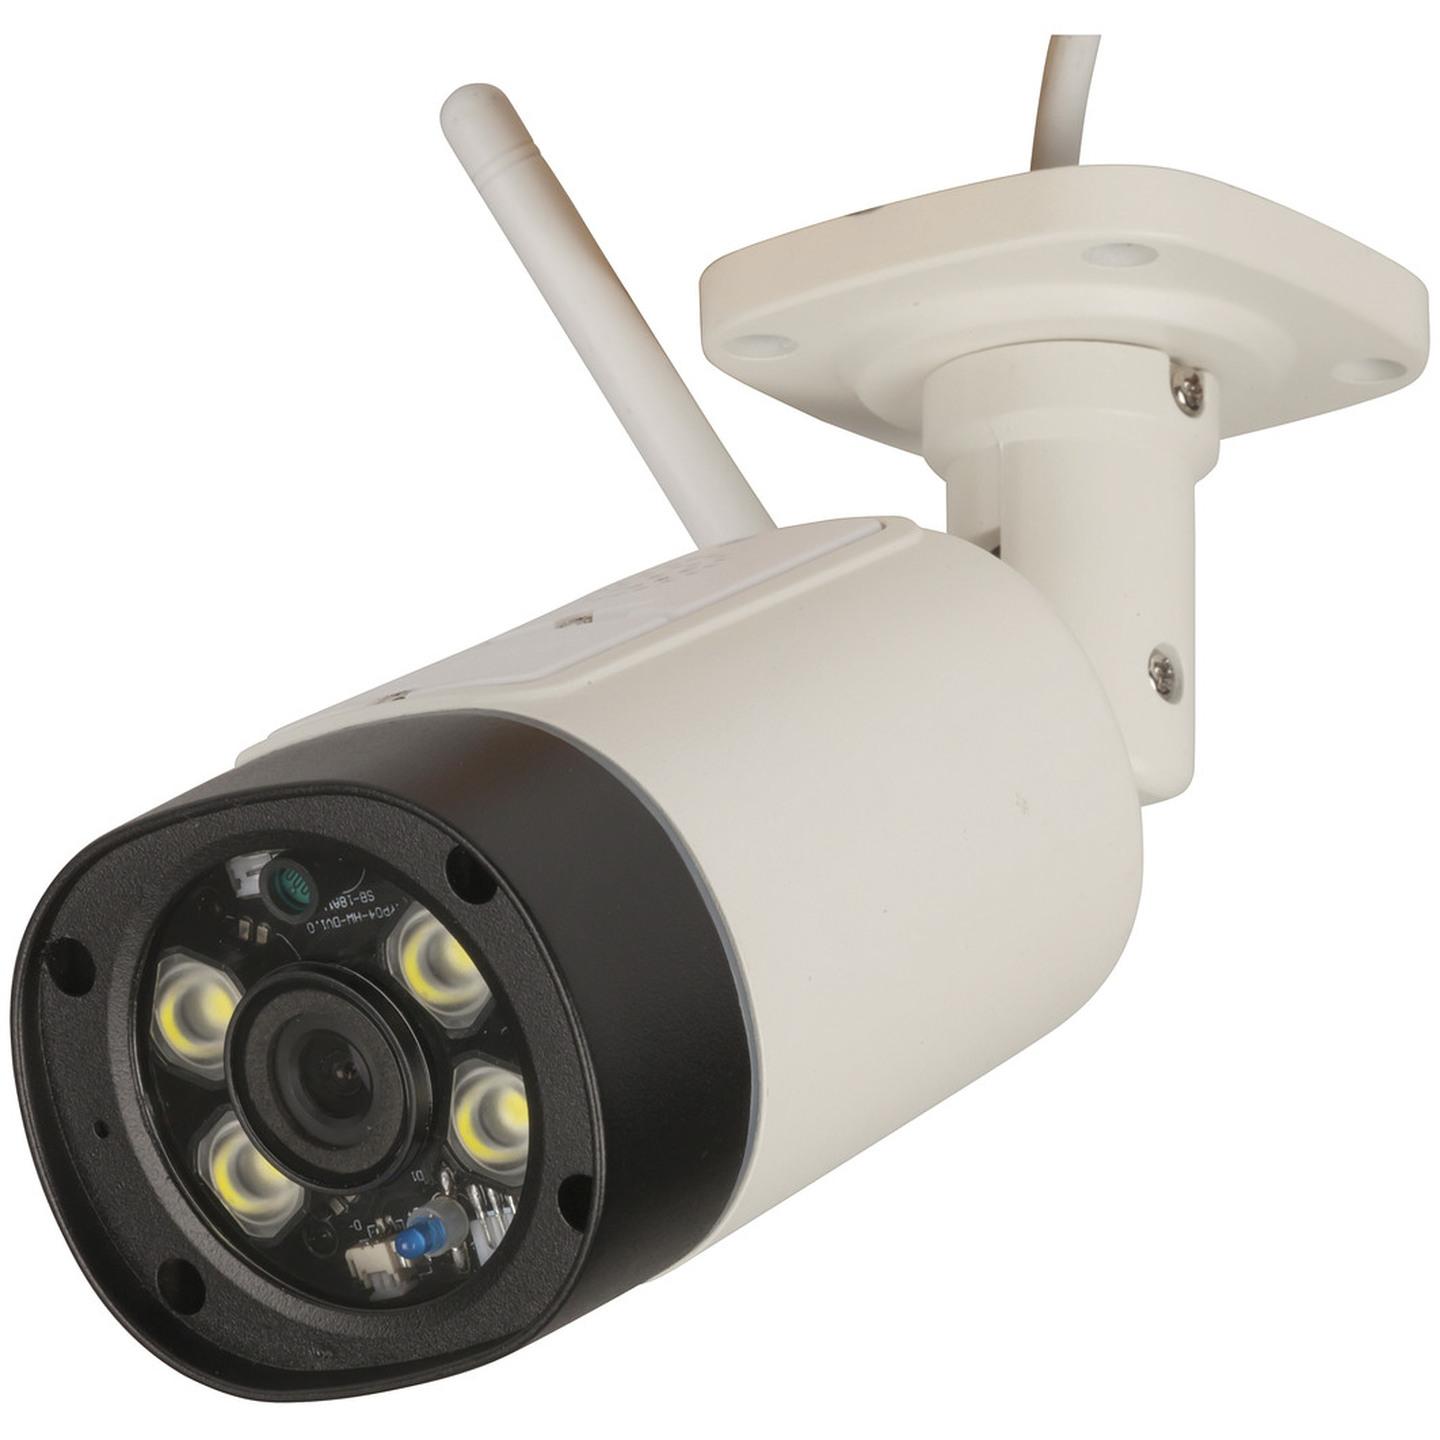 1080p Wireless IP Camera withLED Spotlights